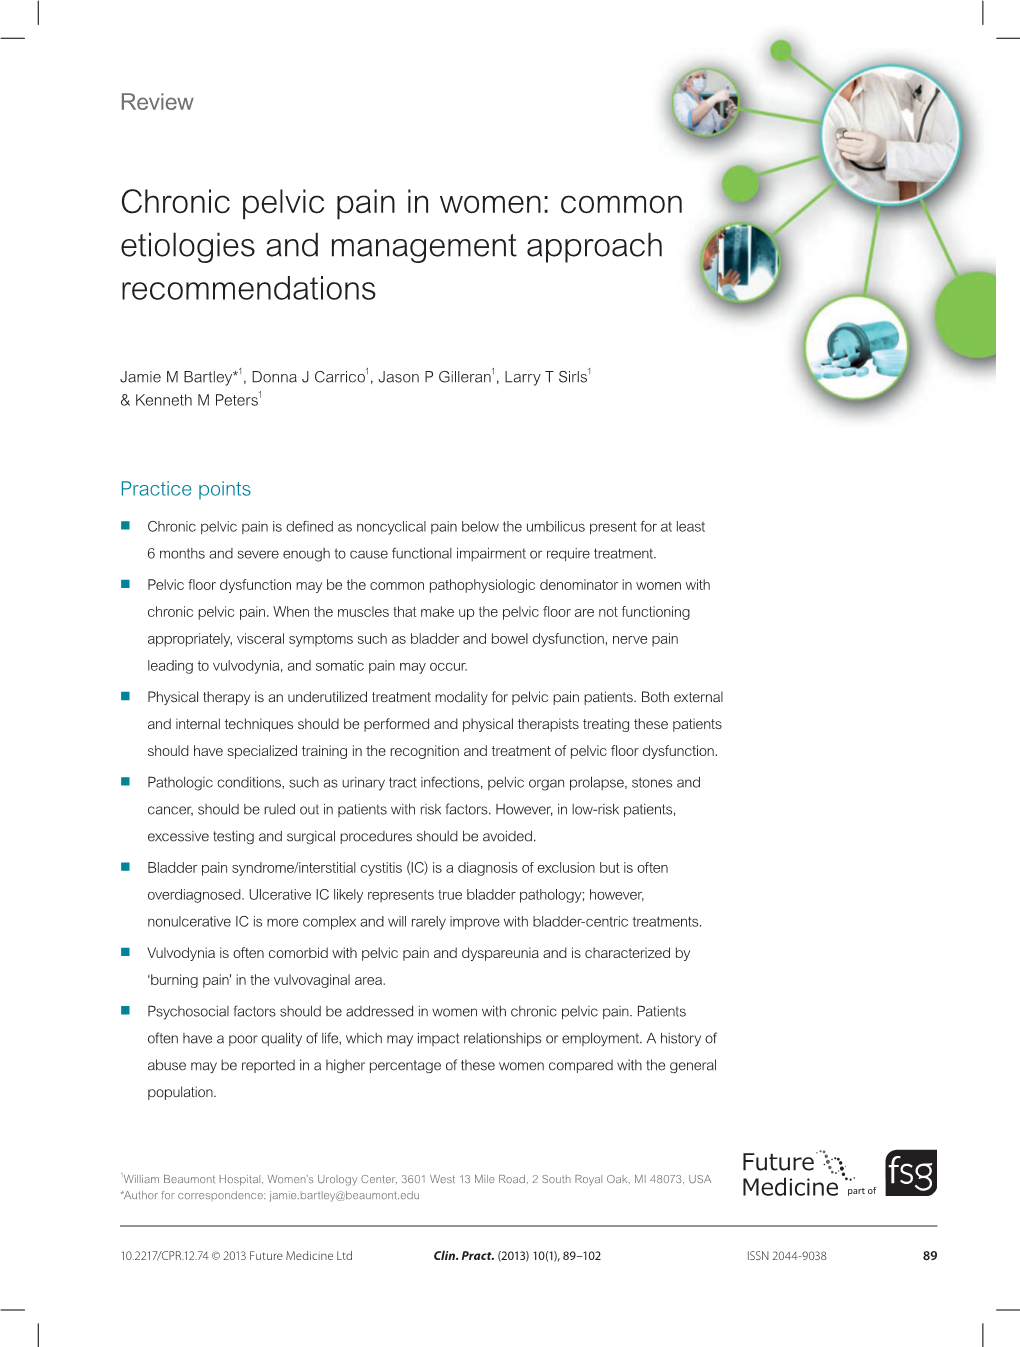 Chronic Pelvic Pain in Women: Common Etiologies and Management Approach Recommendations